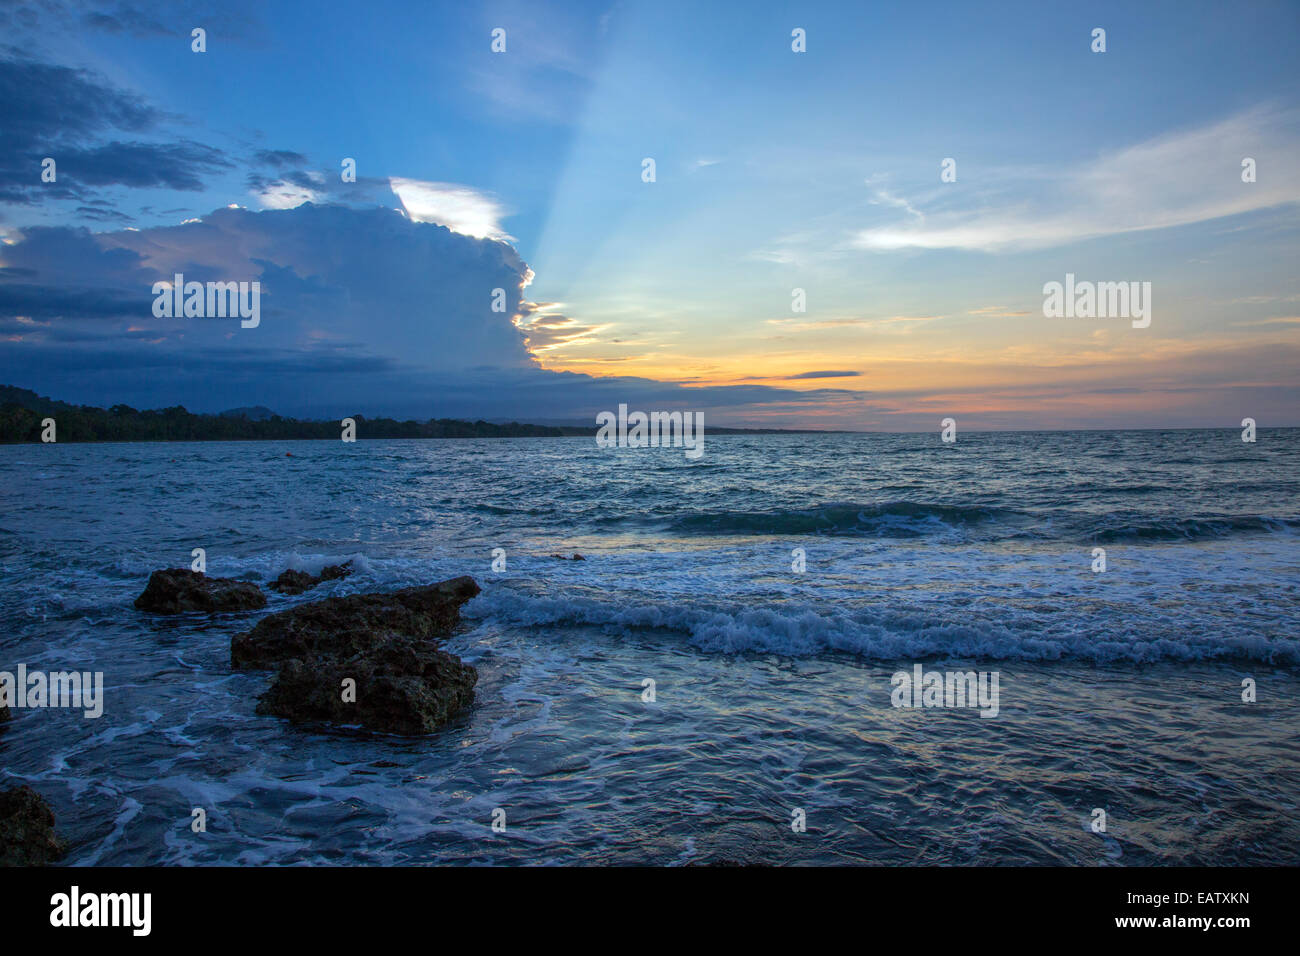 Sunset sunbeams in the evening sky and gentle waves lapping coral rock. Stock Photo